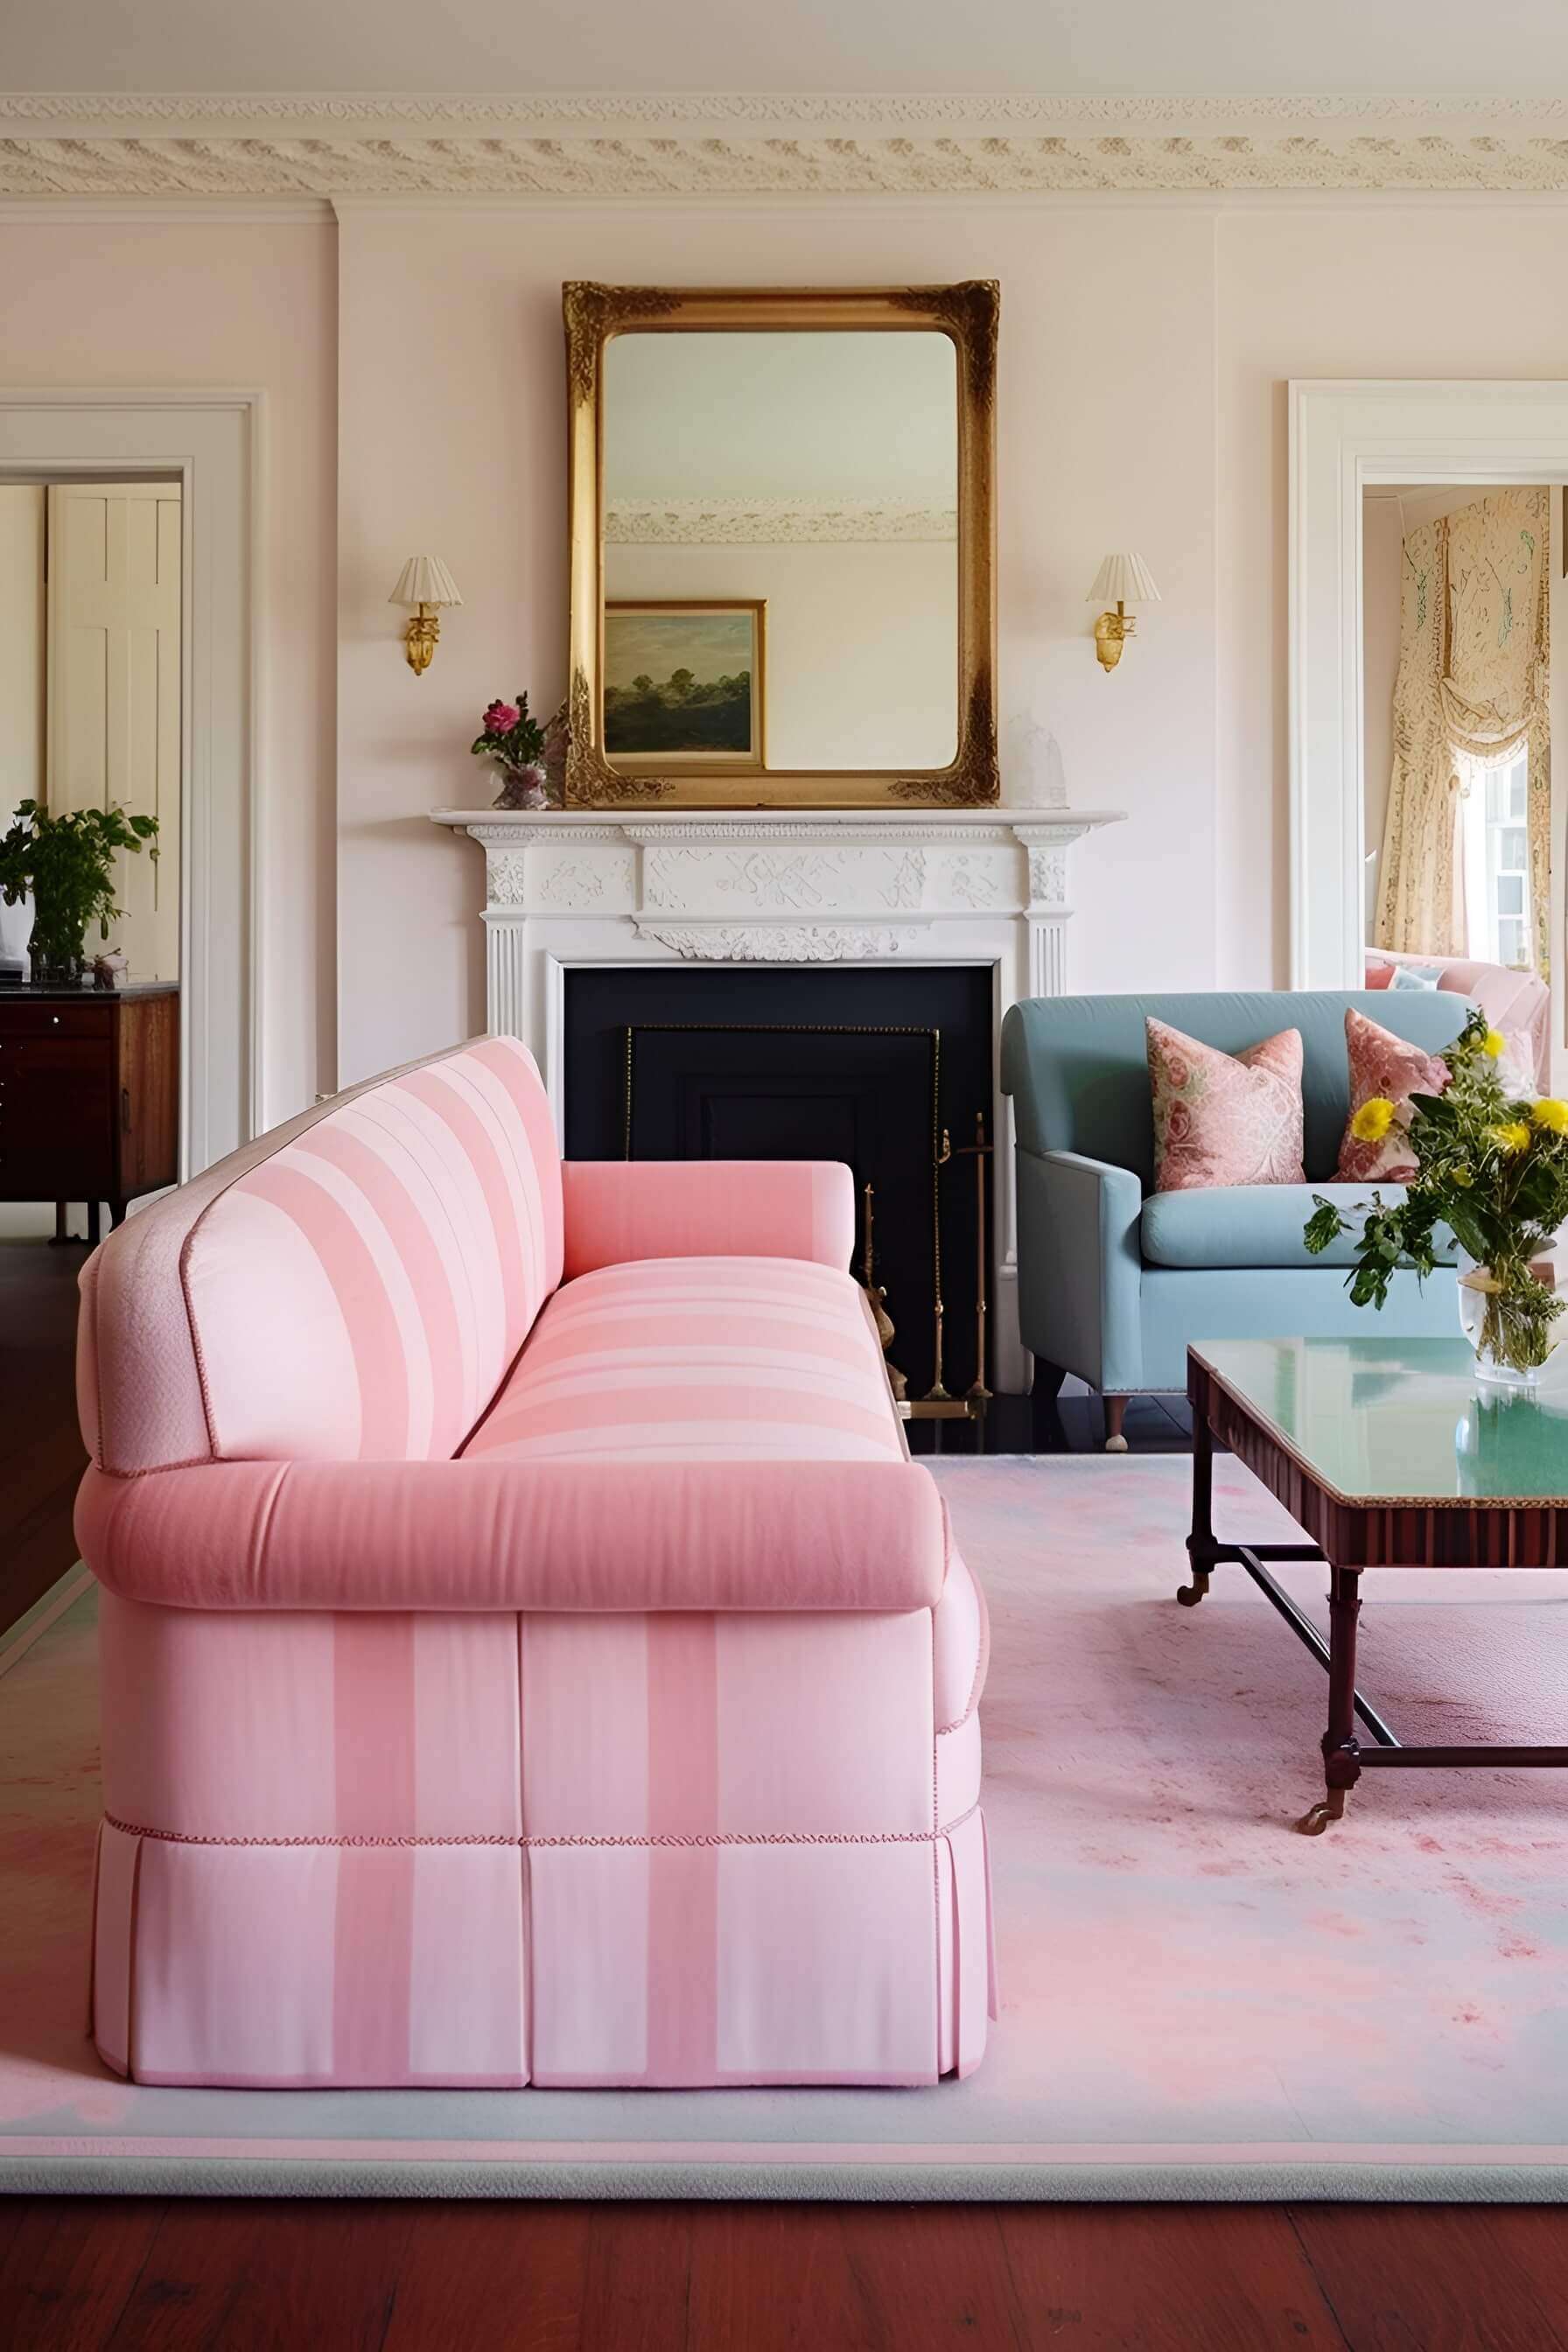 a victorian sitting room with a pink striped sofa, pink rug, blue armchair, coffee table, flowers, vintage mirror, vintage fireplace